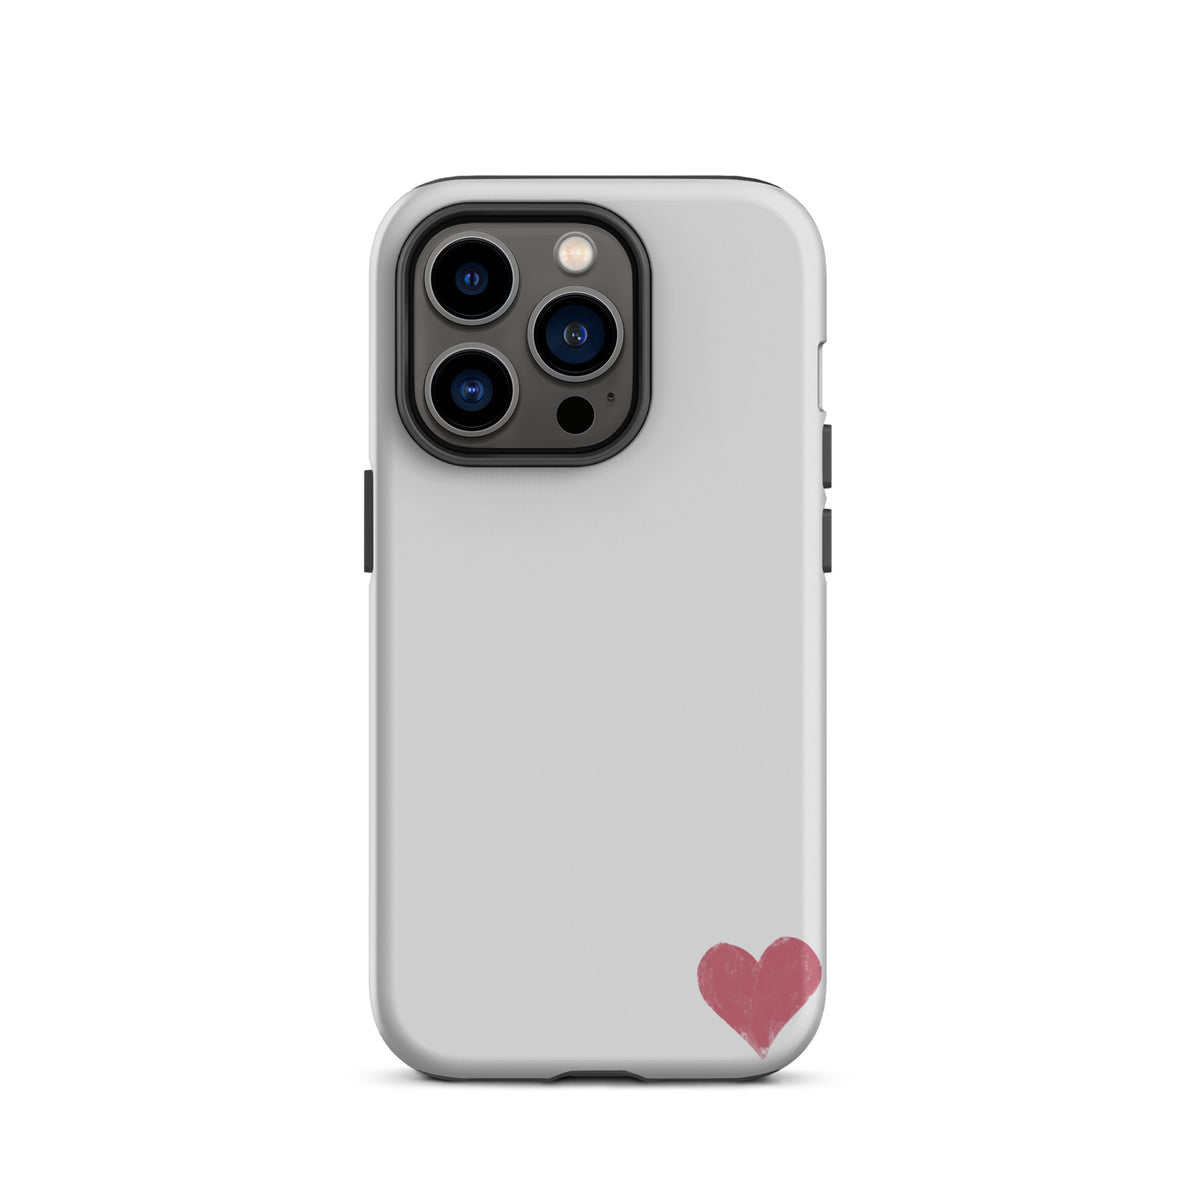 iphone case with small heart